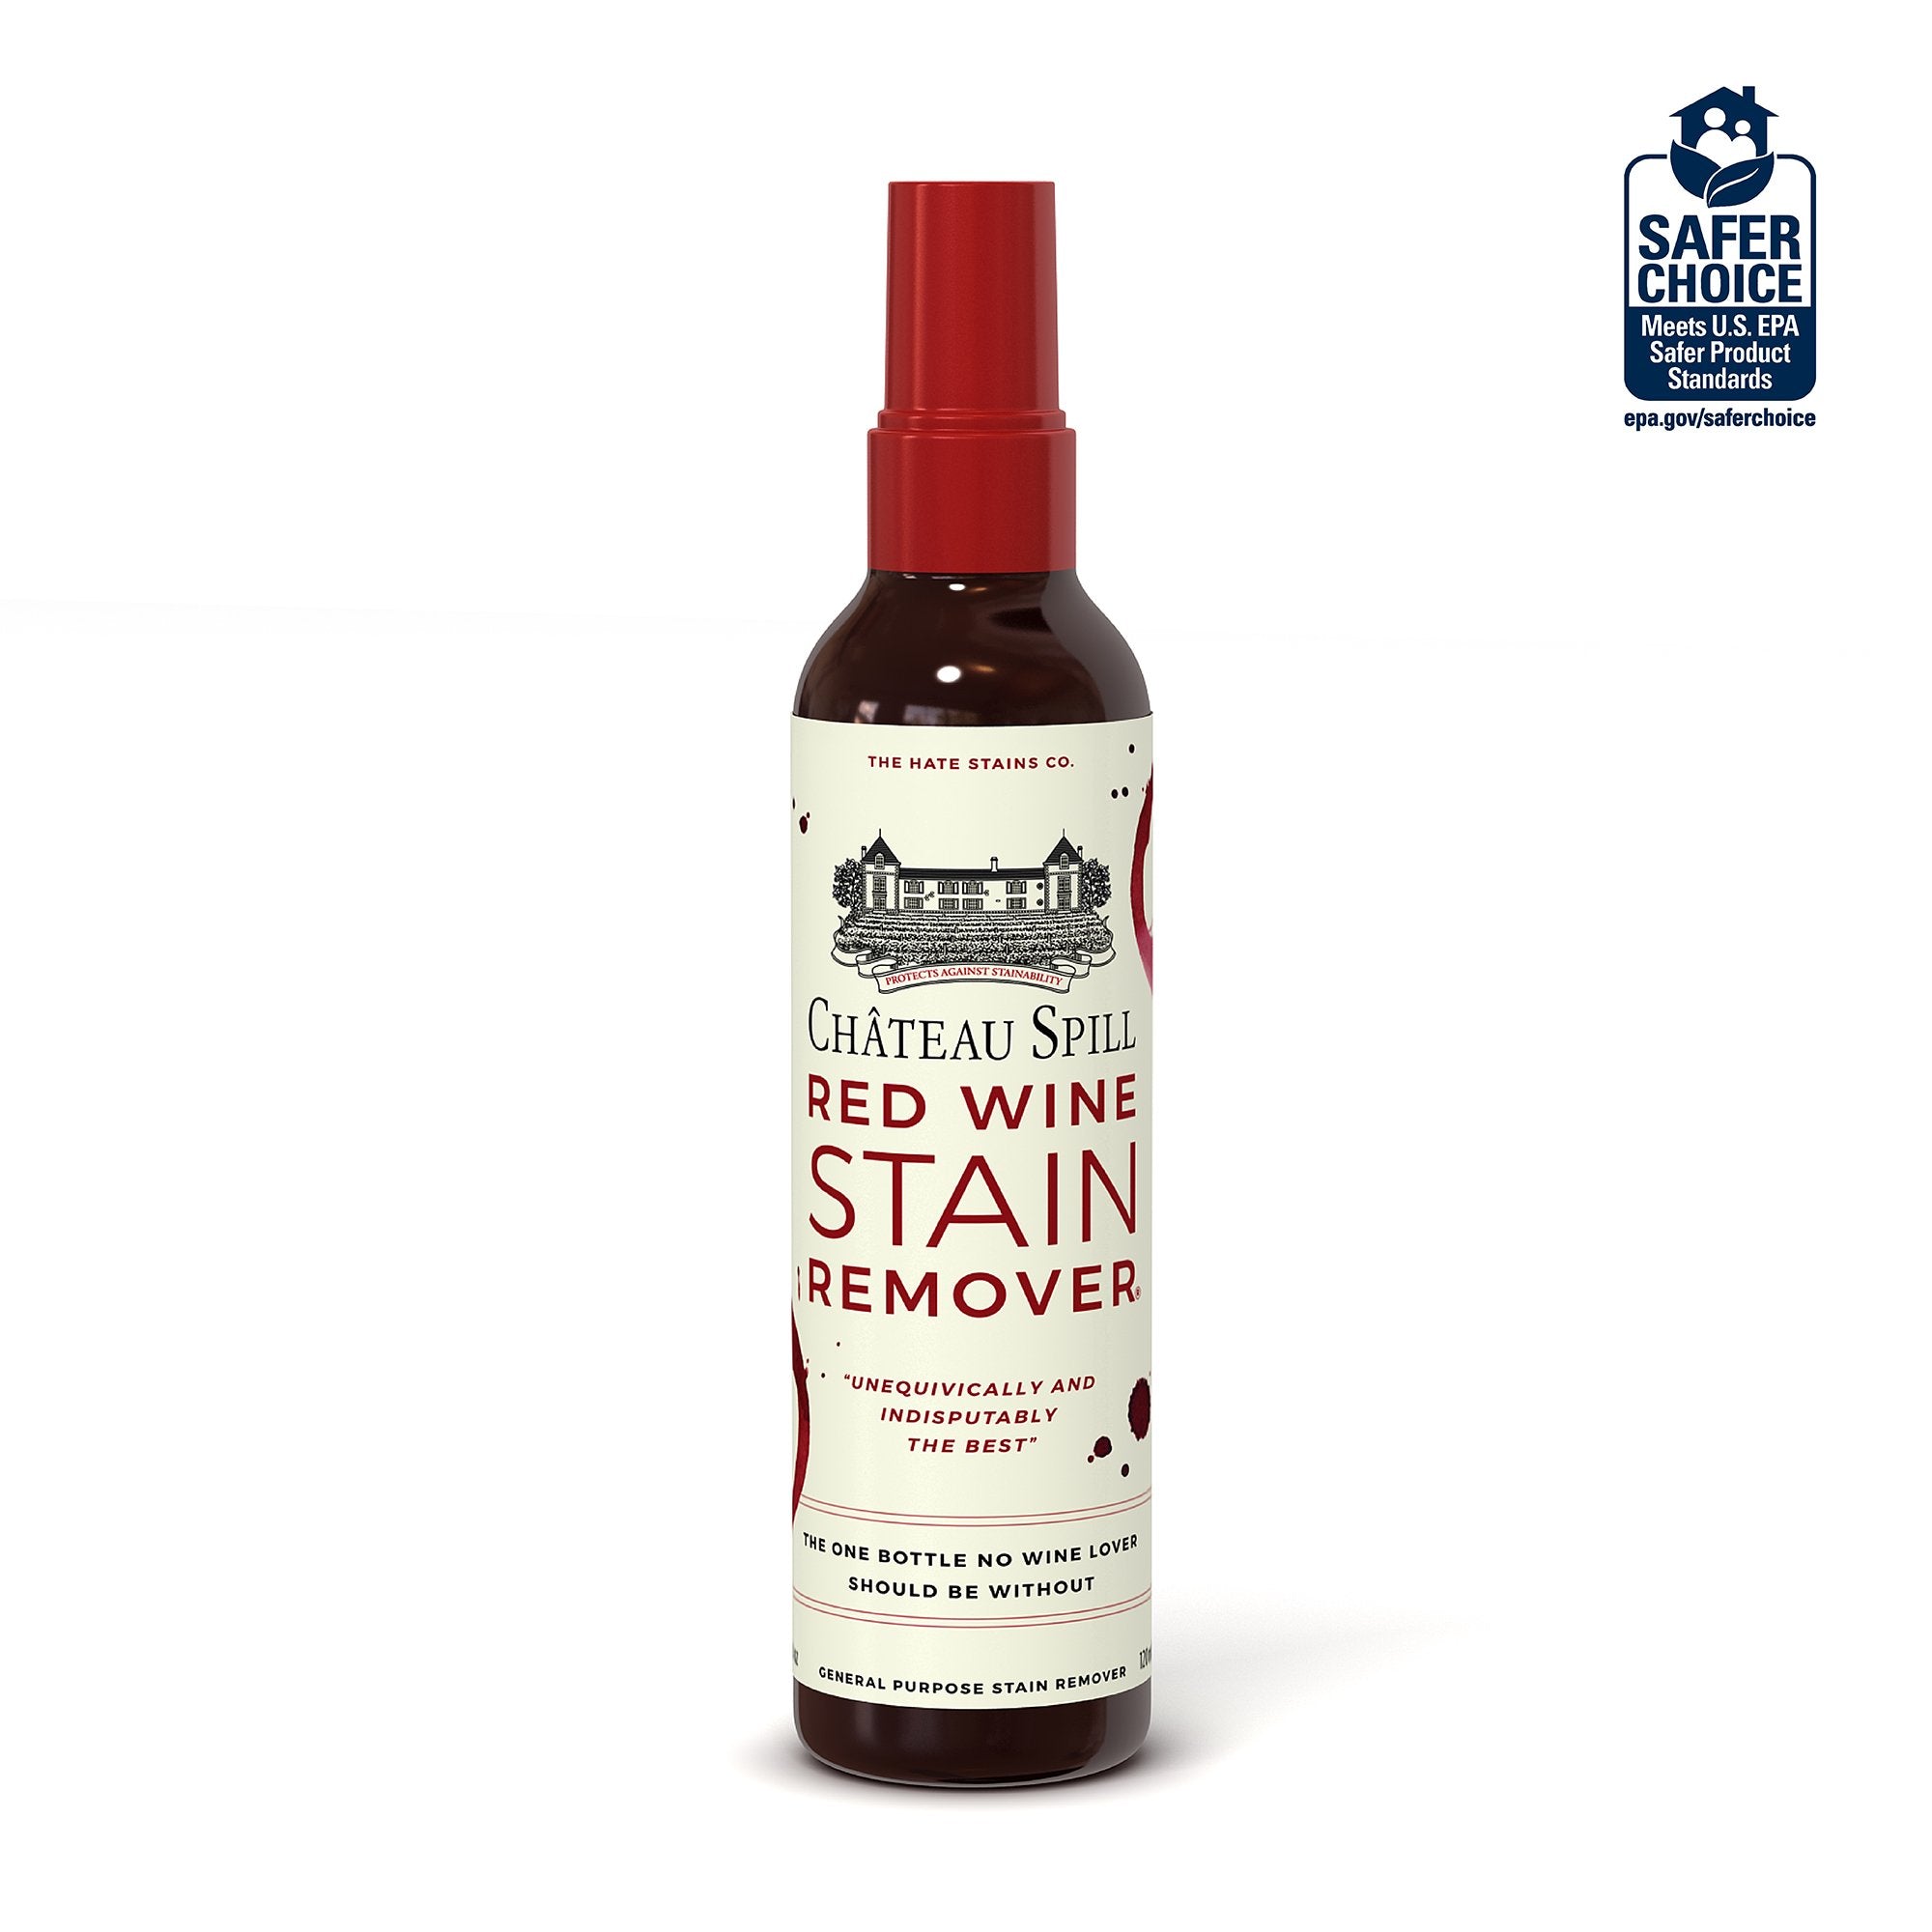 The Hate Stains Co. - Château Spill Red Wine Stain Remover